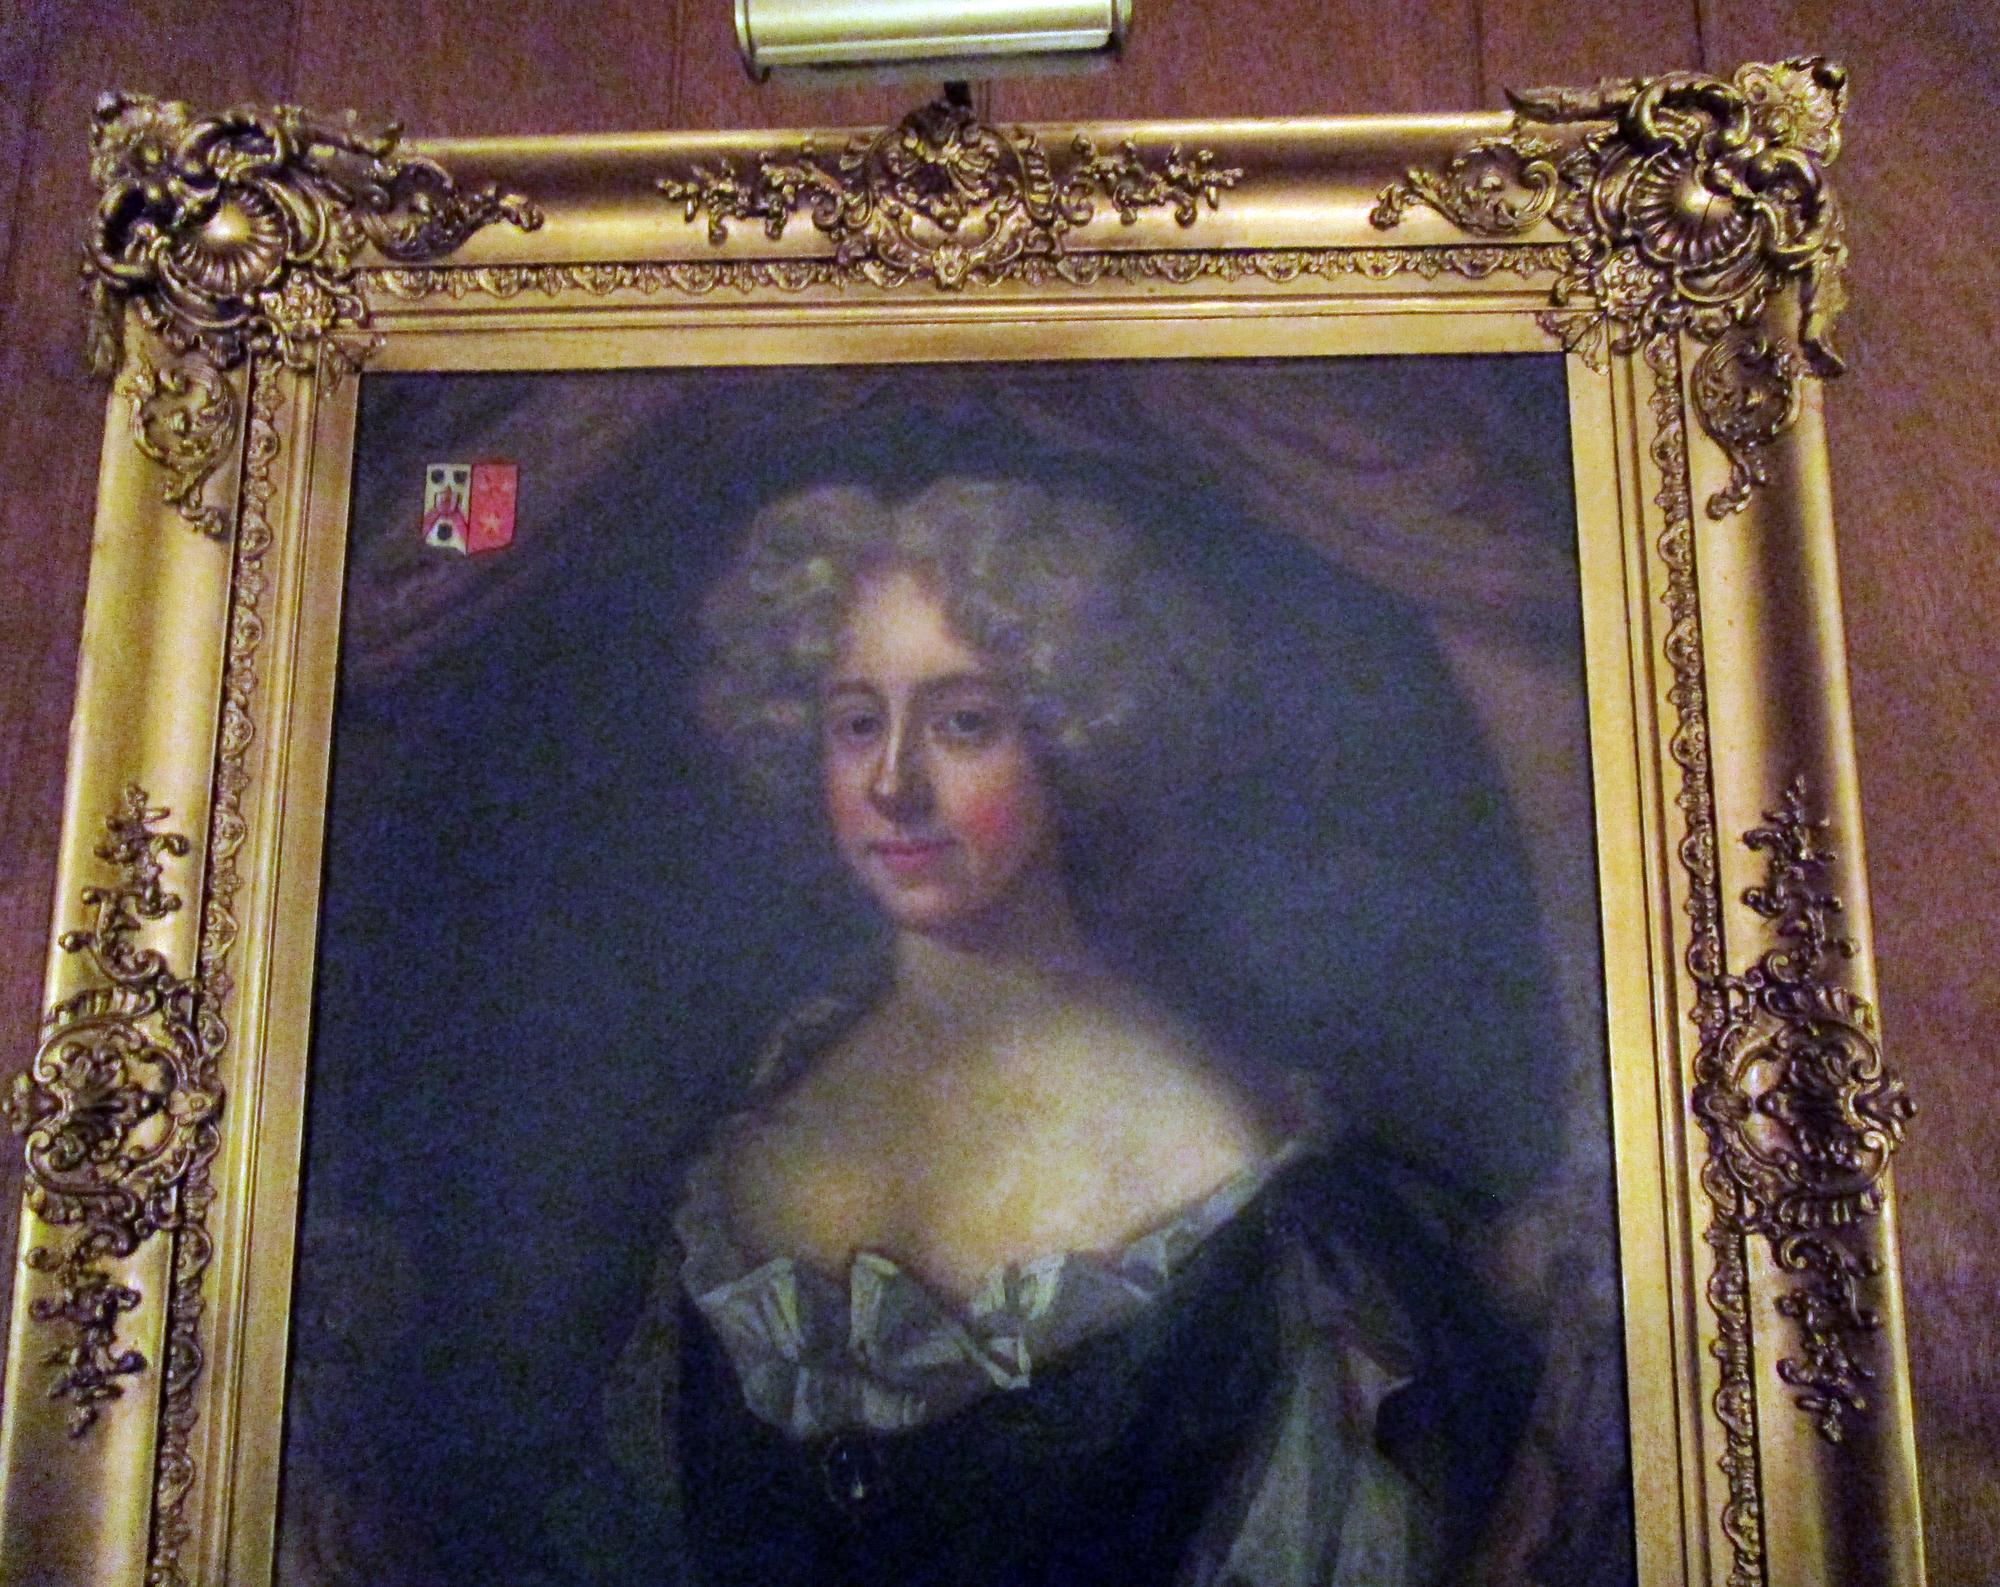 18th century English noblewoman in a gold gilt ornate period frame. Lovely detail and color, coat of arms in corner. Unsigned.
Without the frame the painting itself measures 29 inches tall x 24.50 inches wide. See other measurements below.